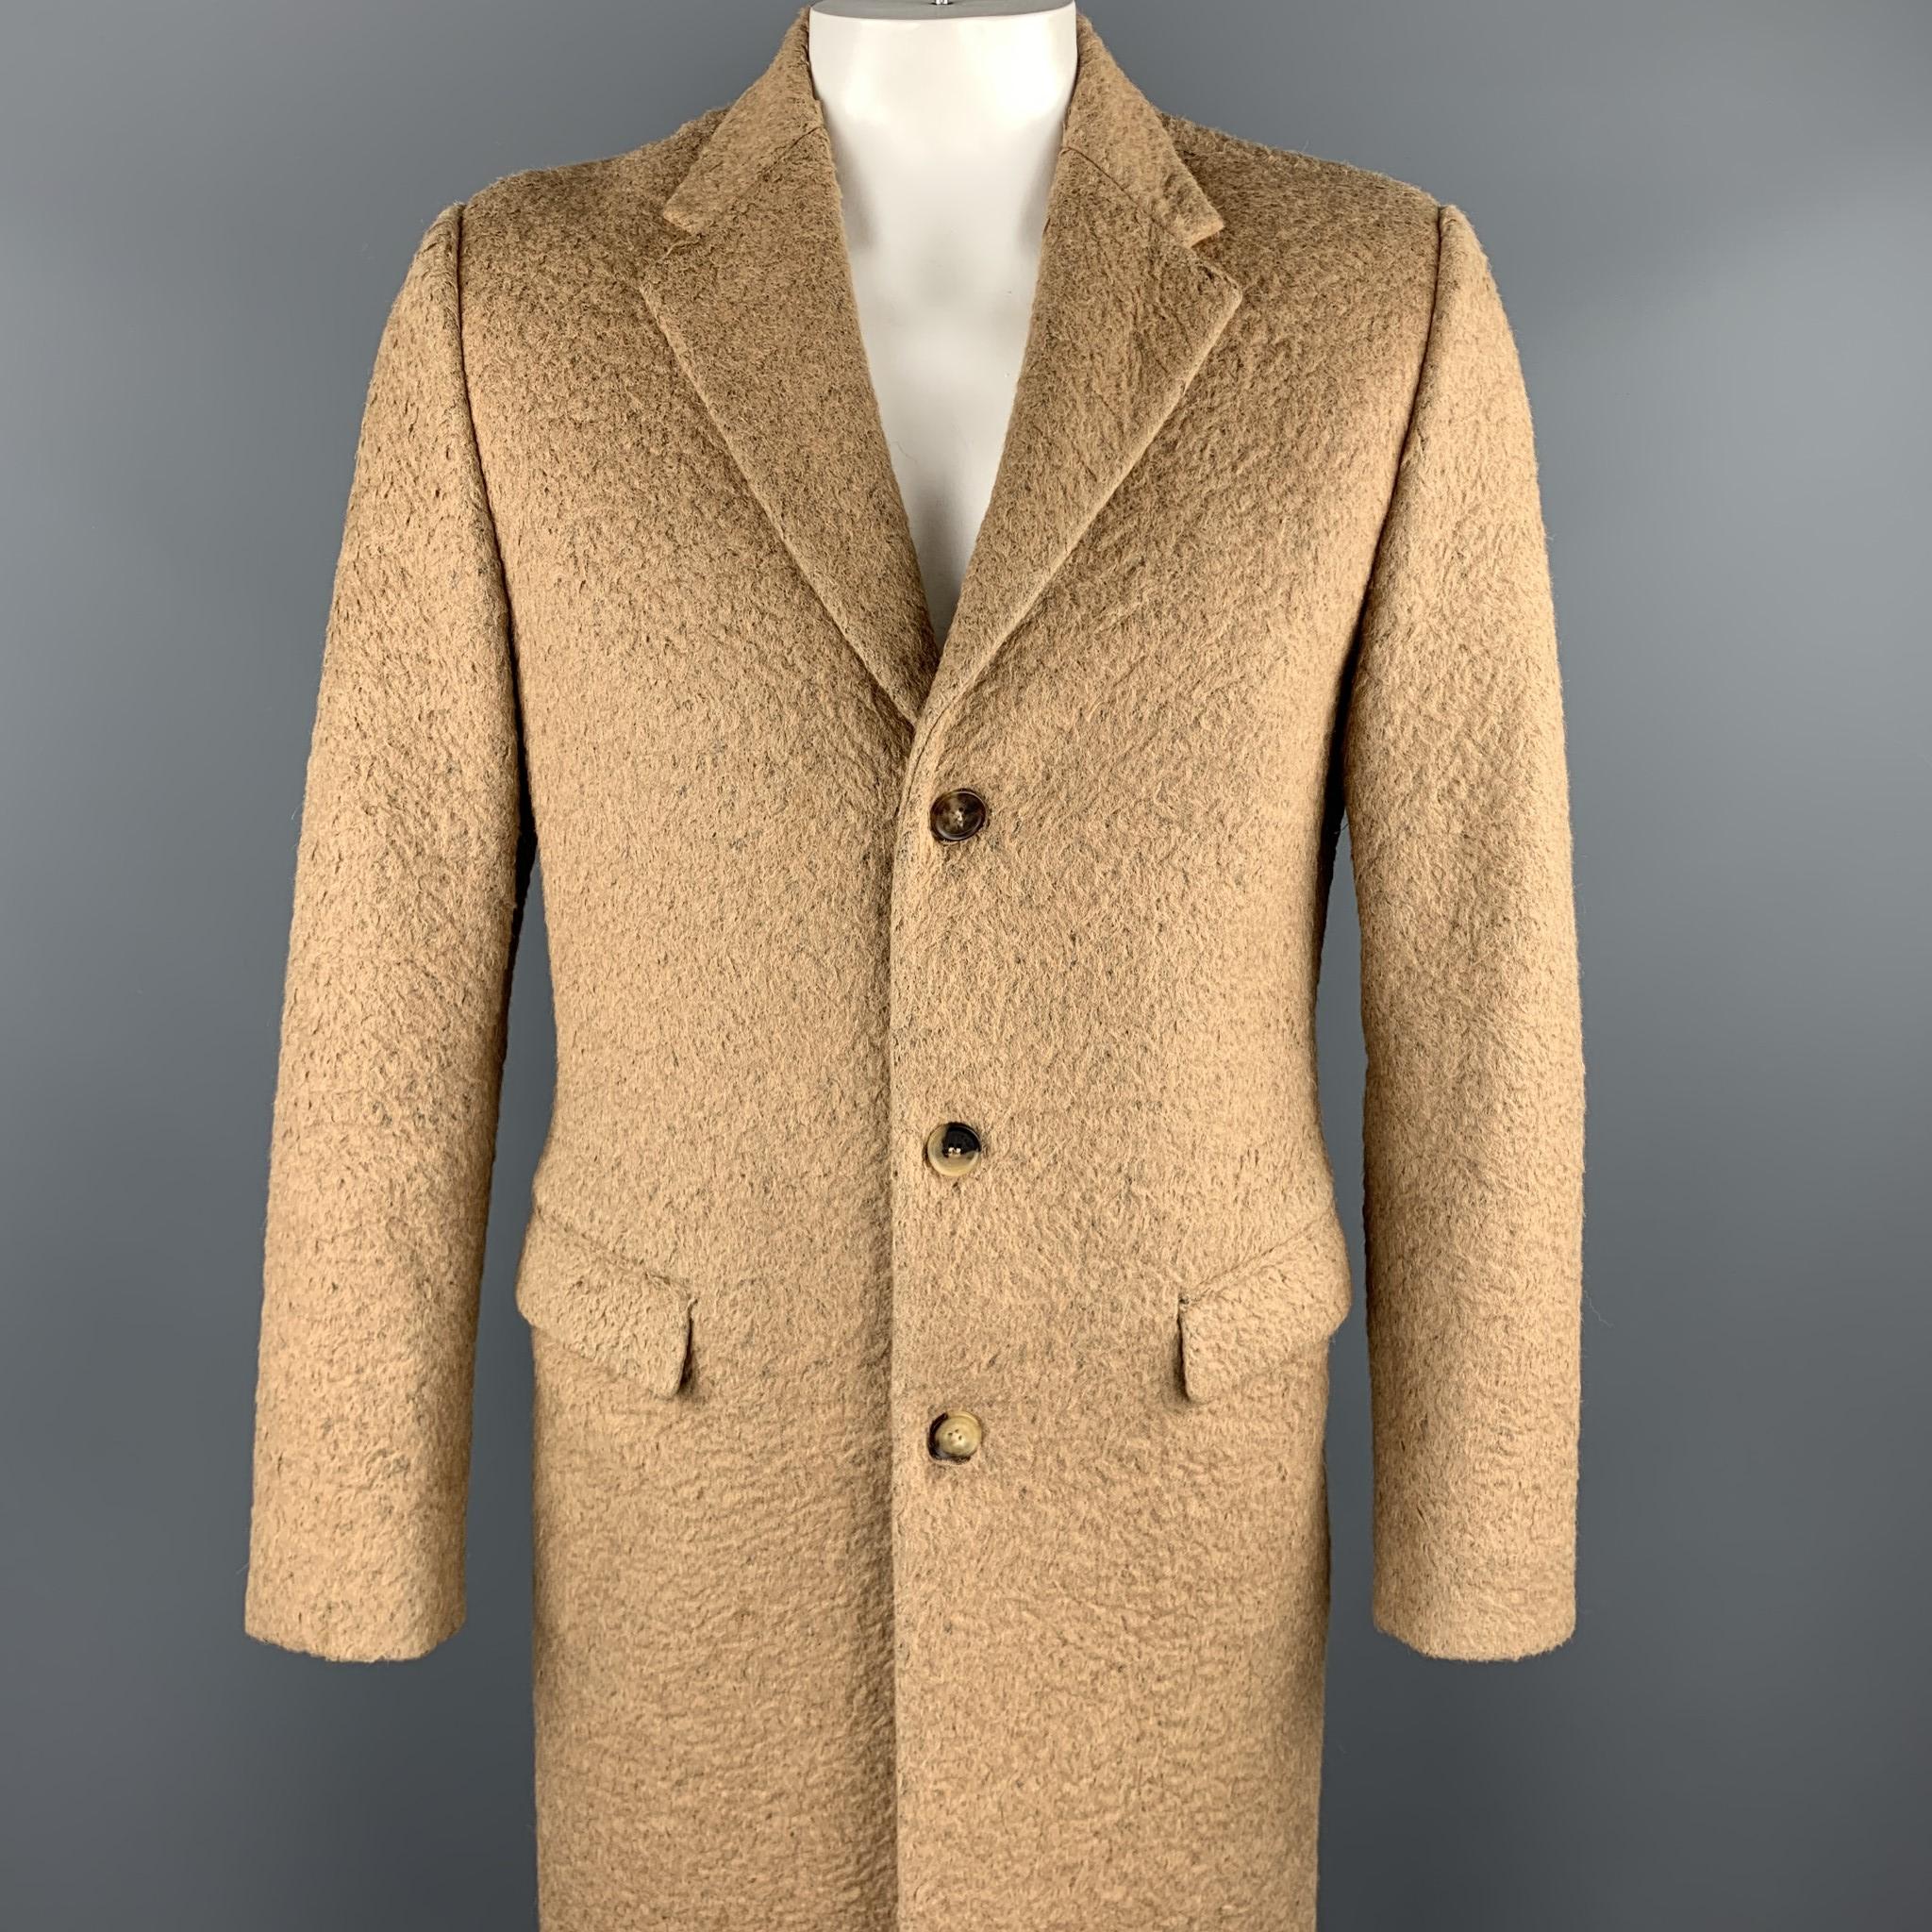 CALVIN KLEIN COLLECTION coat comes in a tan textured wool blend featuring a notch lapel, flap pockets, and a three button closure. Made in Italy.

Very Good Pre-Owned Condition.
Marked: IT 48

Measurements:

Shoulder: 17 in. 
Chest: 40 in. 
Sleeve: